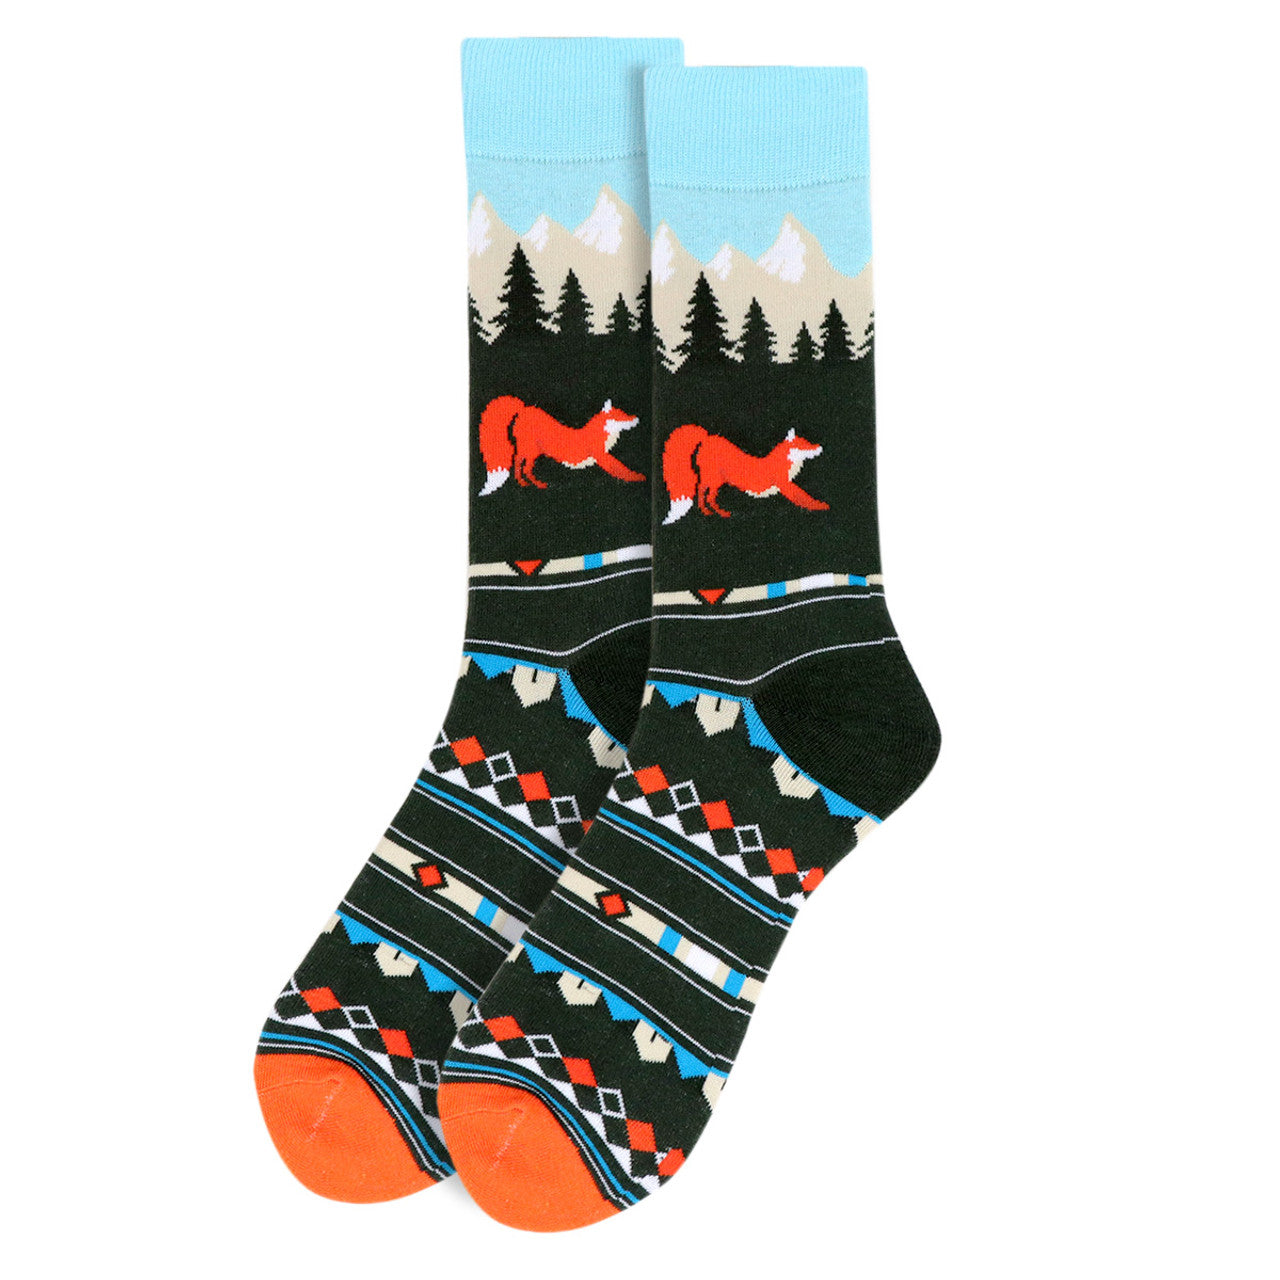 Men's Fox Crew Socks - Mountains Forest - Great for the camping enthusiast or outdoorsman!